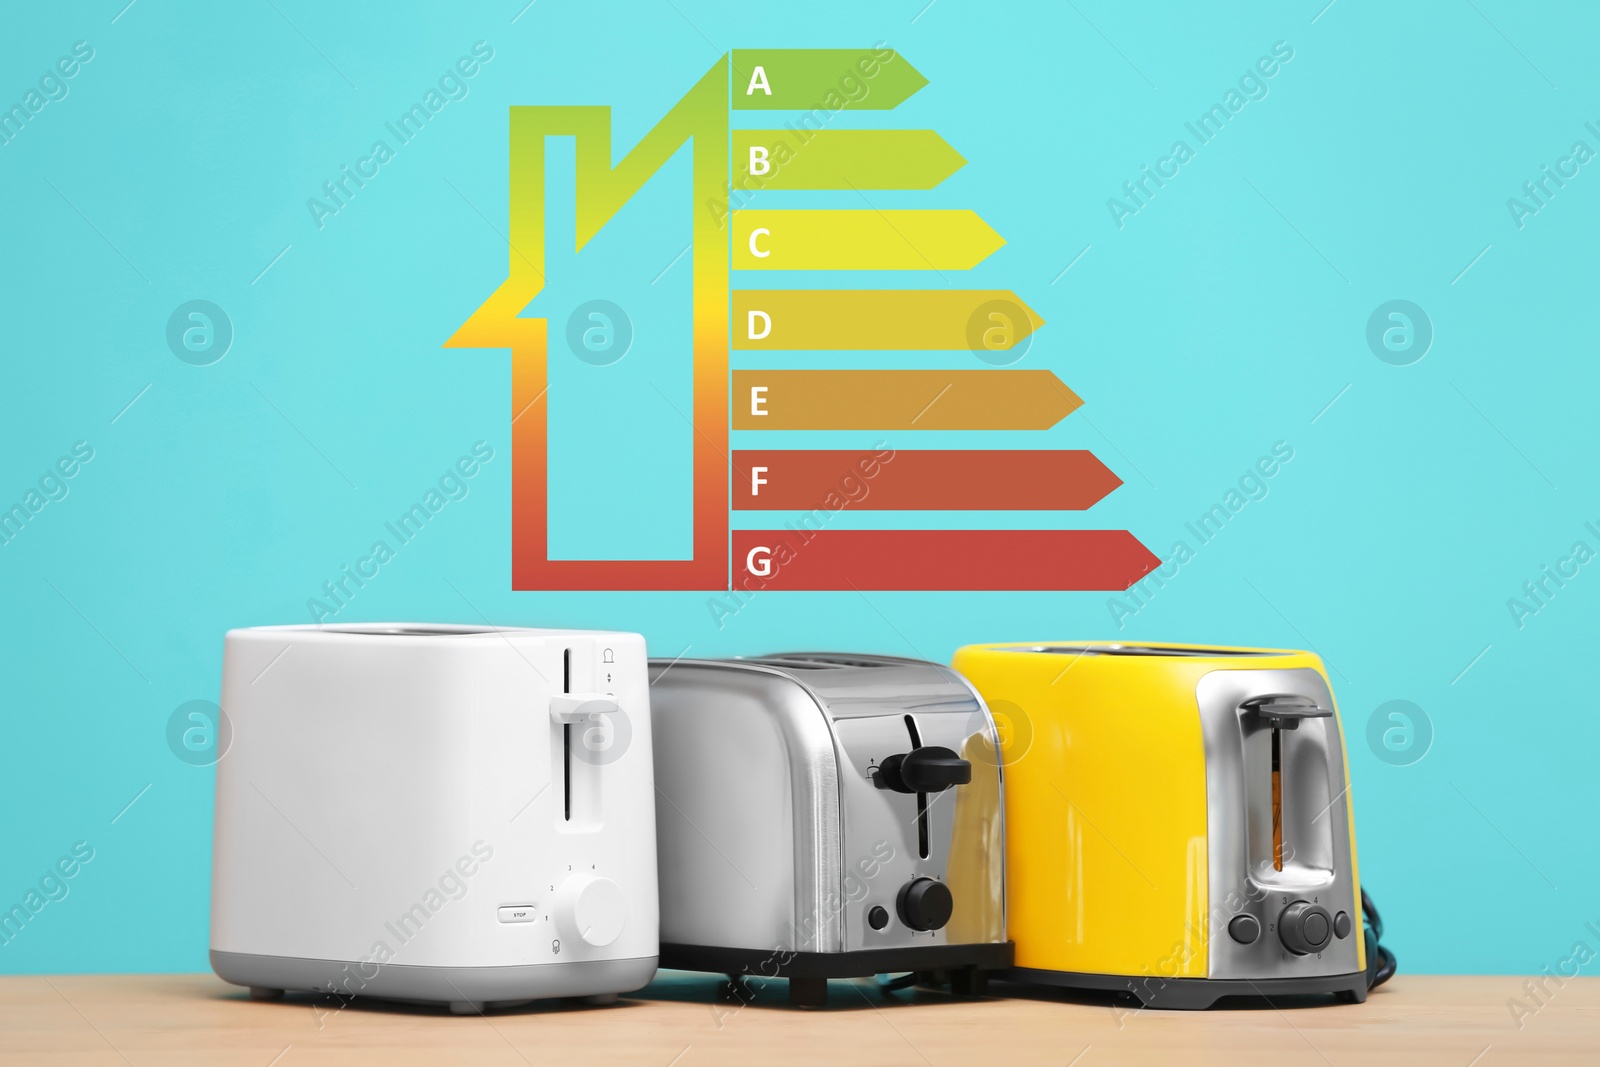 Image of Energy efficiency rating label over different toasters against light blue background